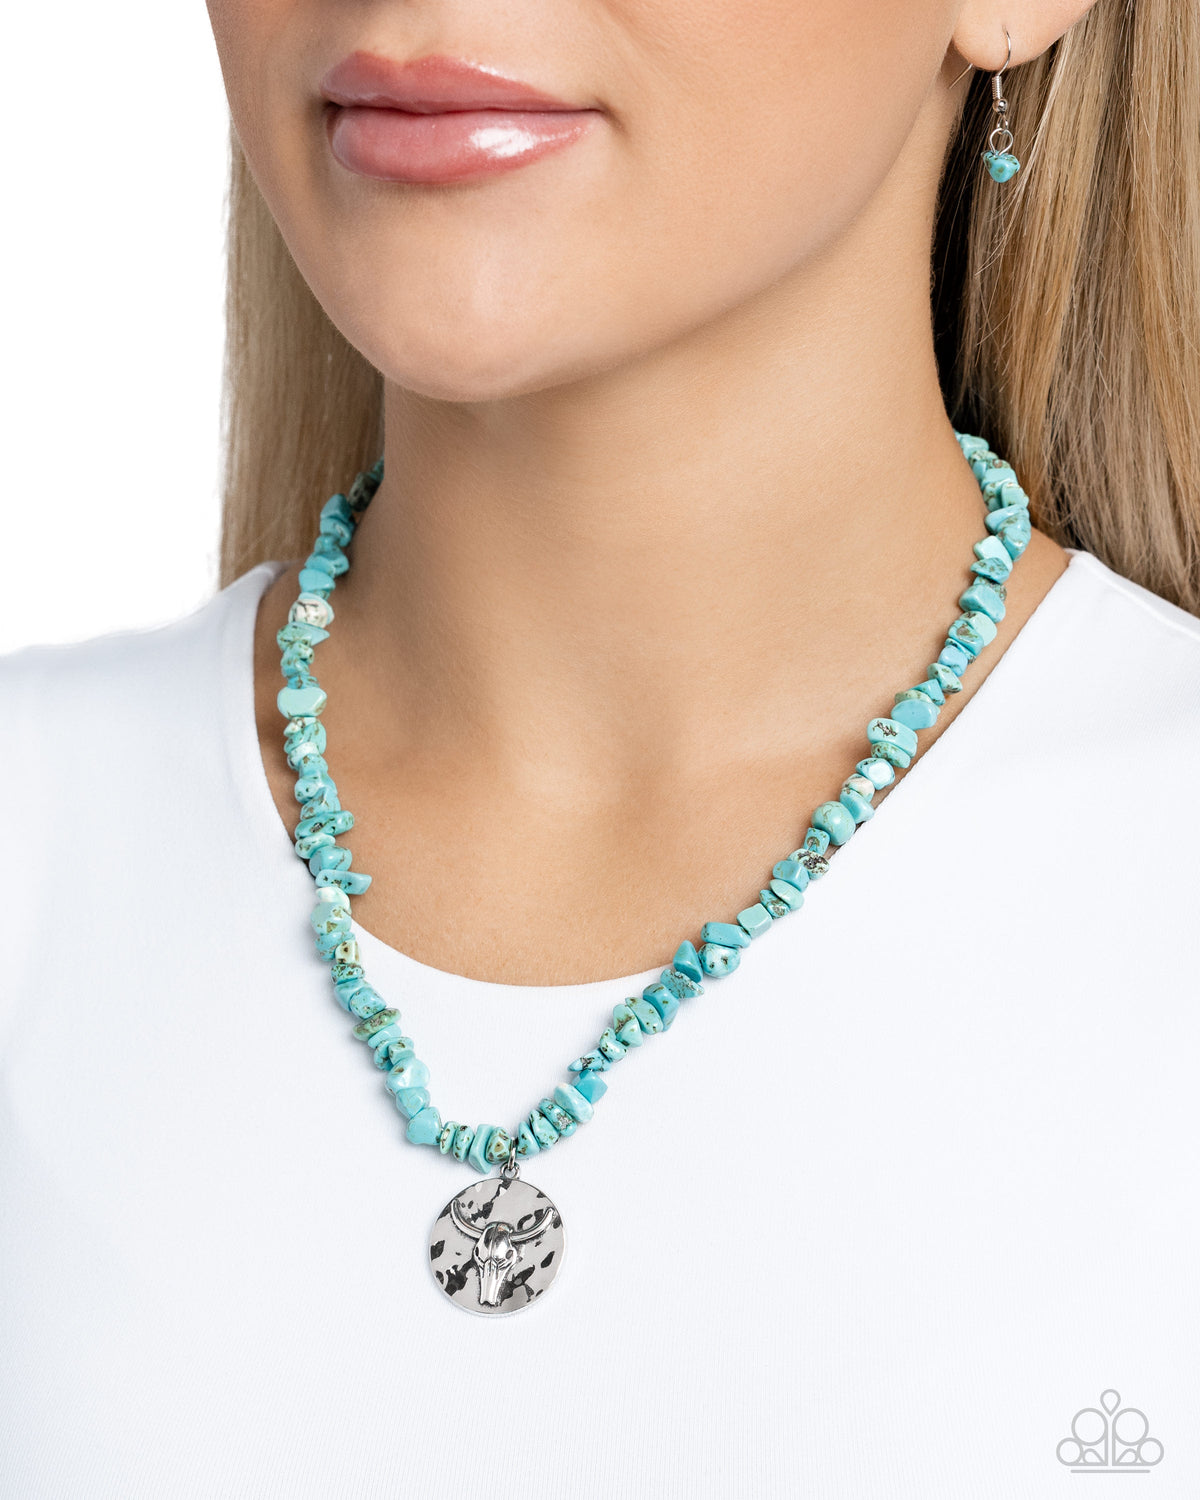 Longhorn Leader Turquoise Blue Stone Necklace - Paparazzi Accessories-on model - CarasShop.com - $5 Jewelry by Cara Jewels